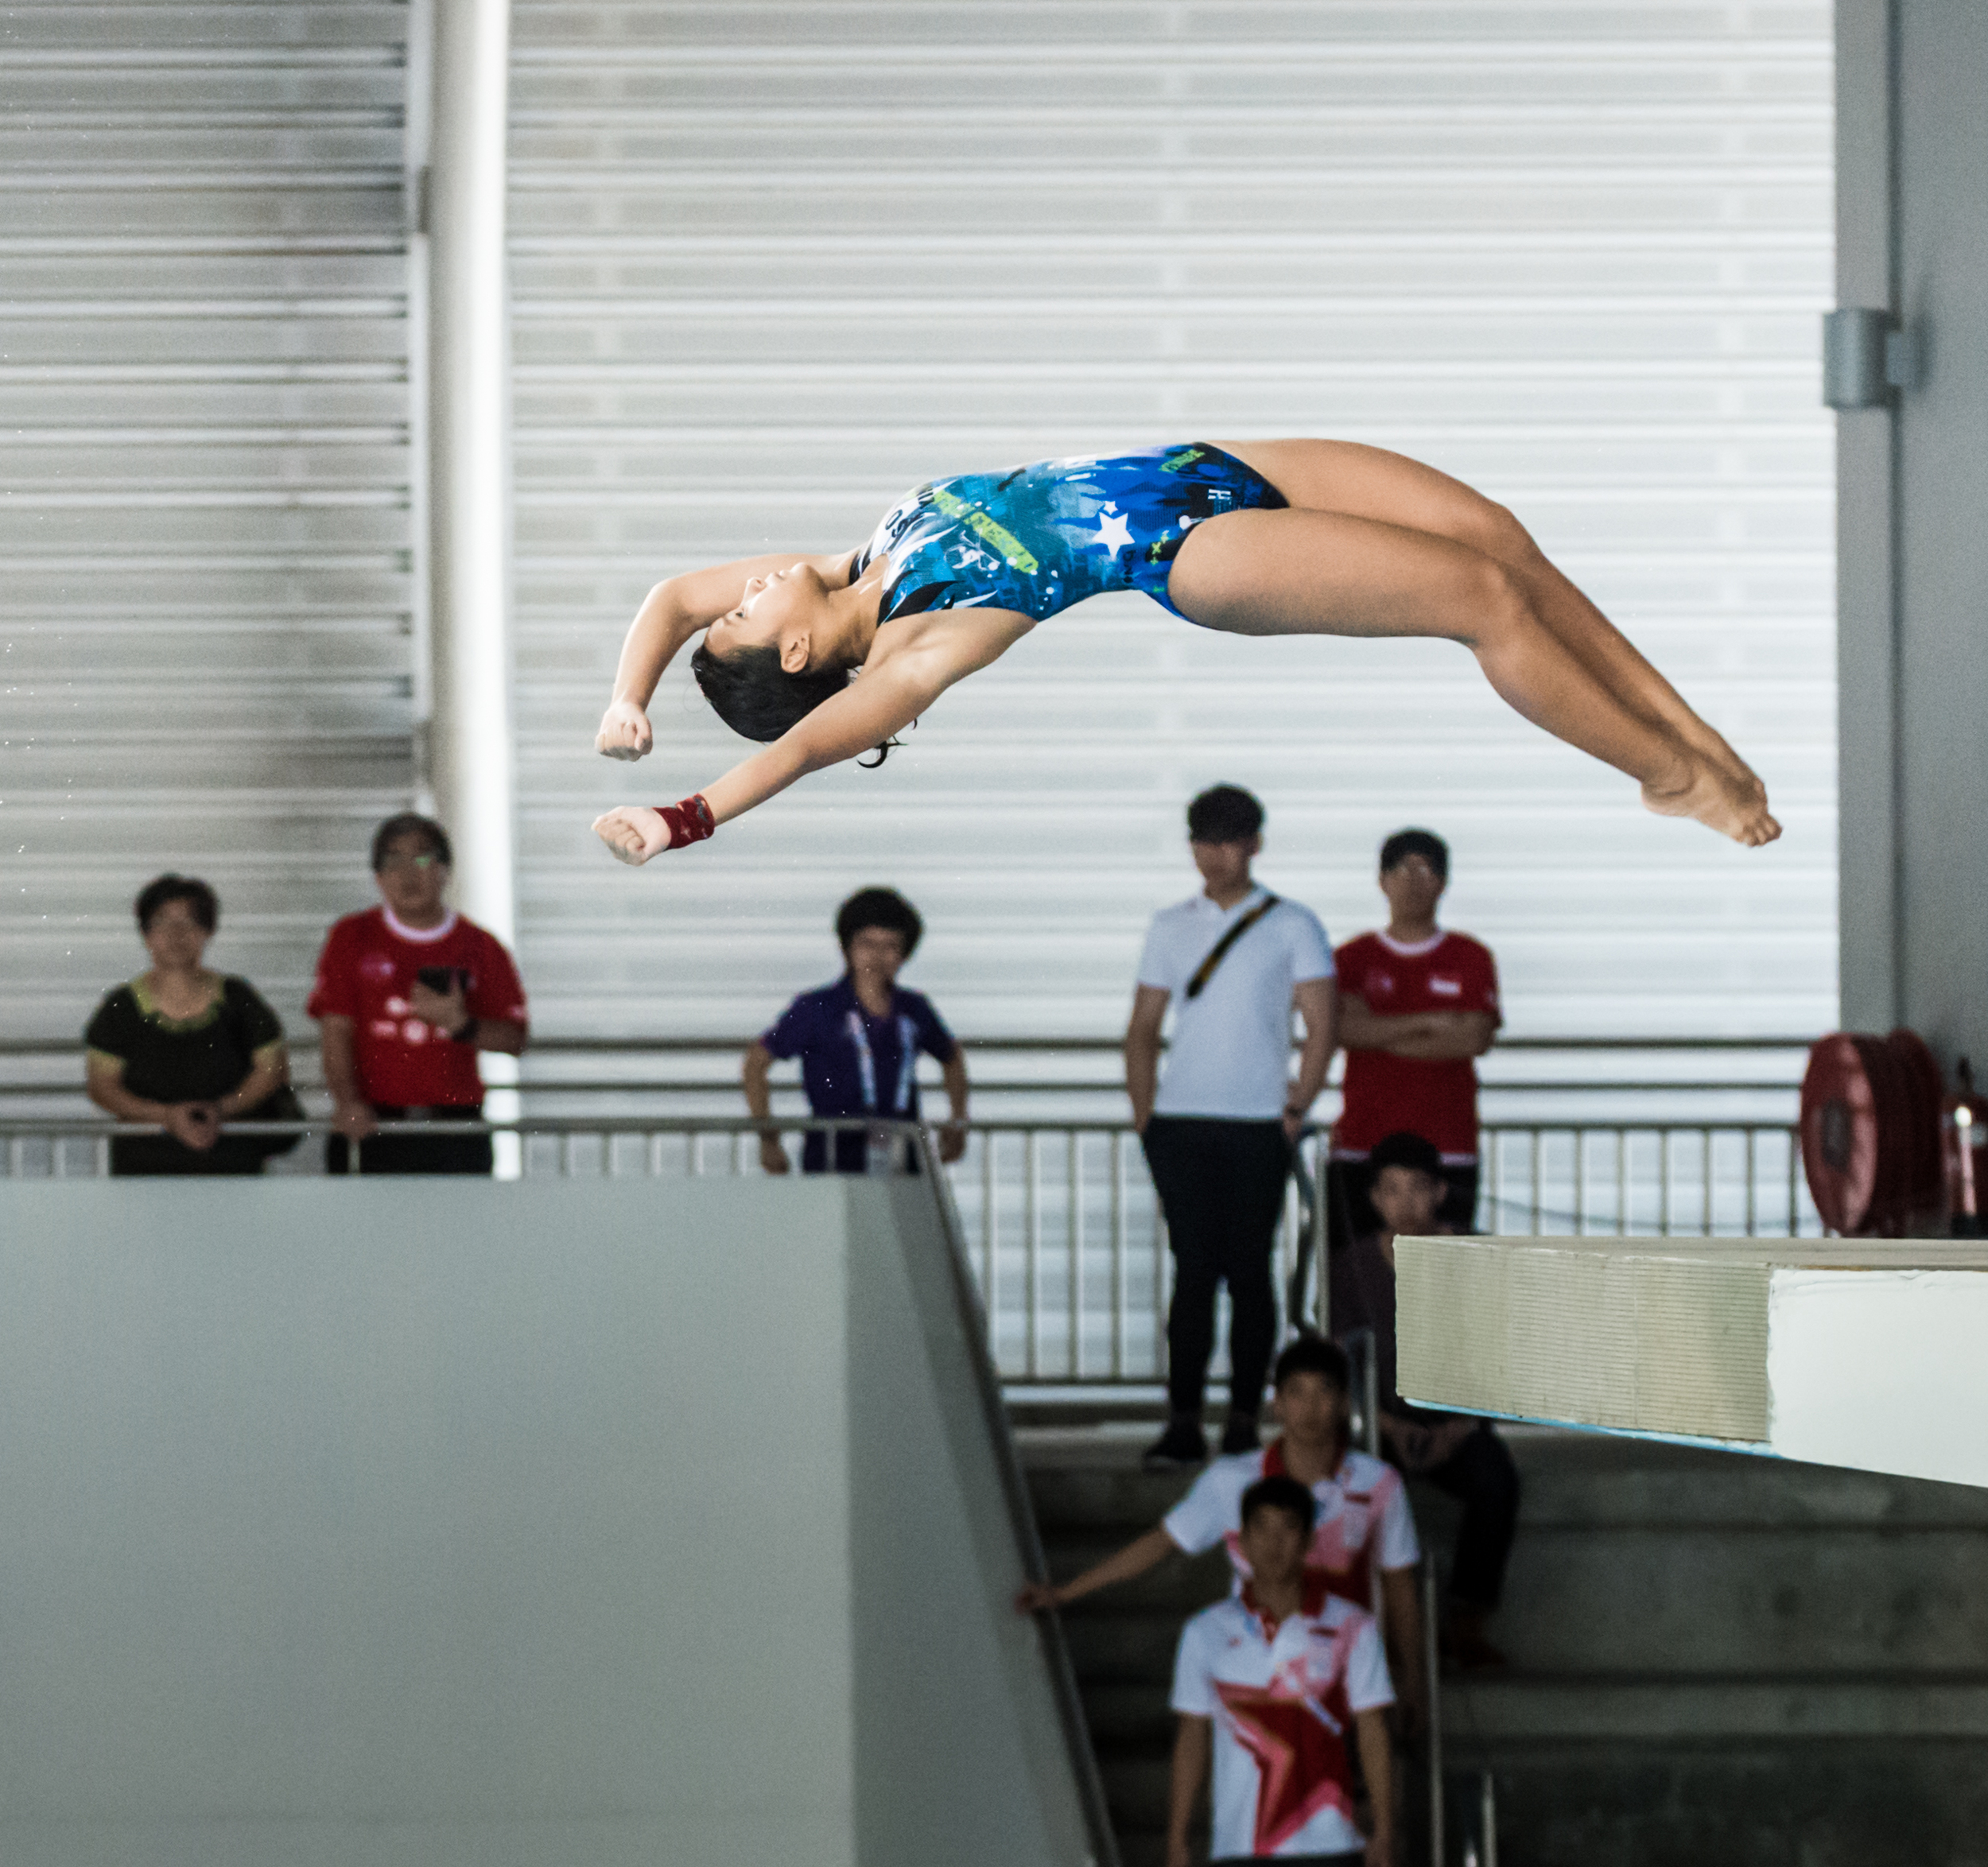 A Malaysian diver jumps off the 10m platform during the SEA Games at the OCBC Aquatic Centre.